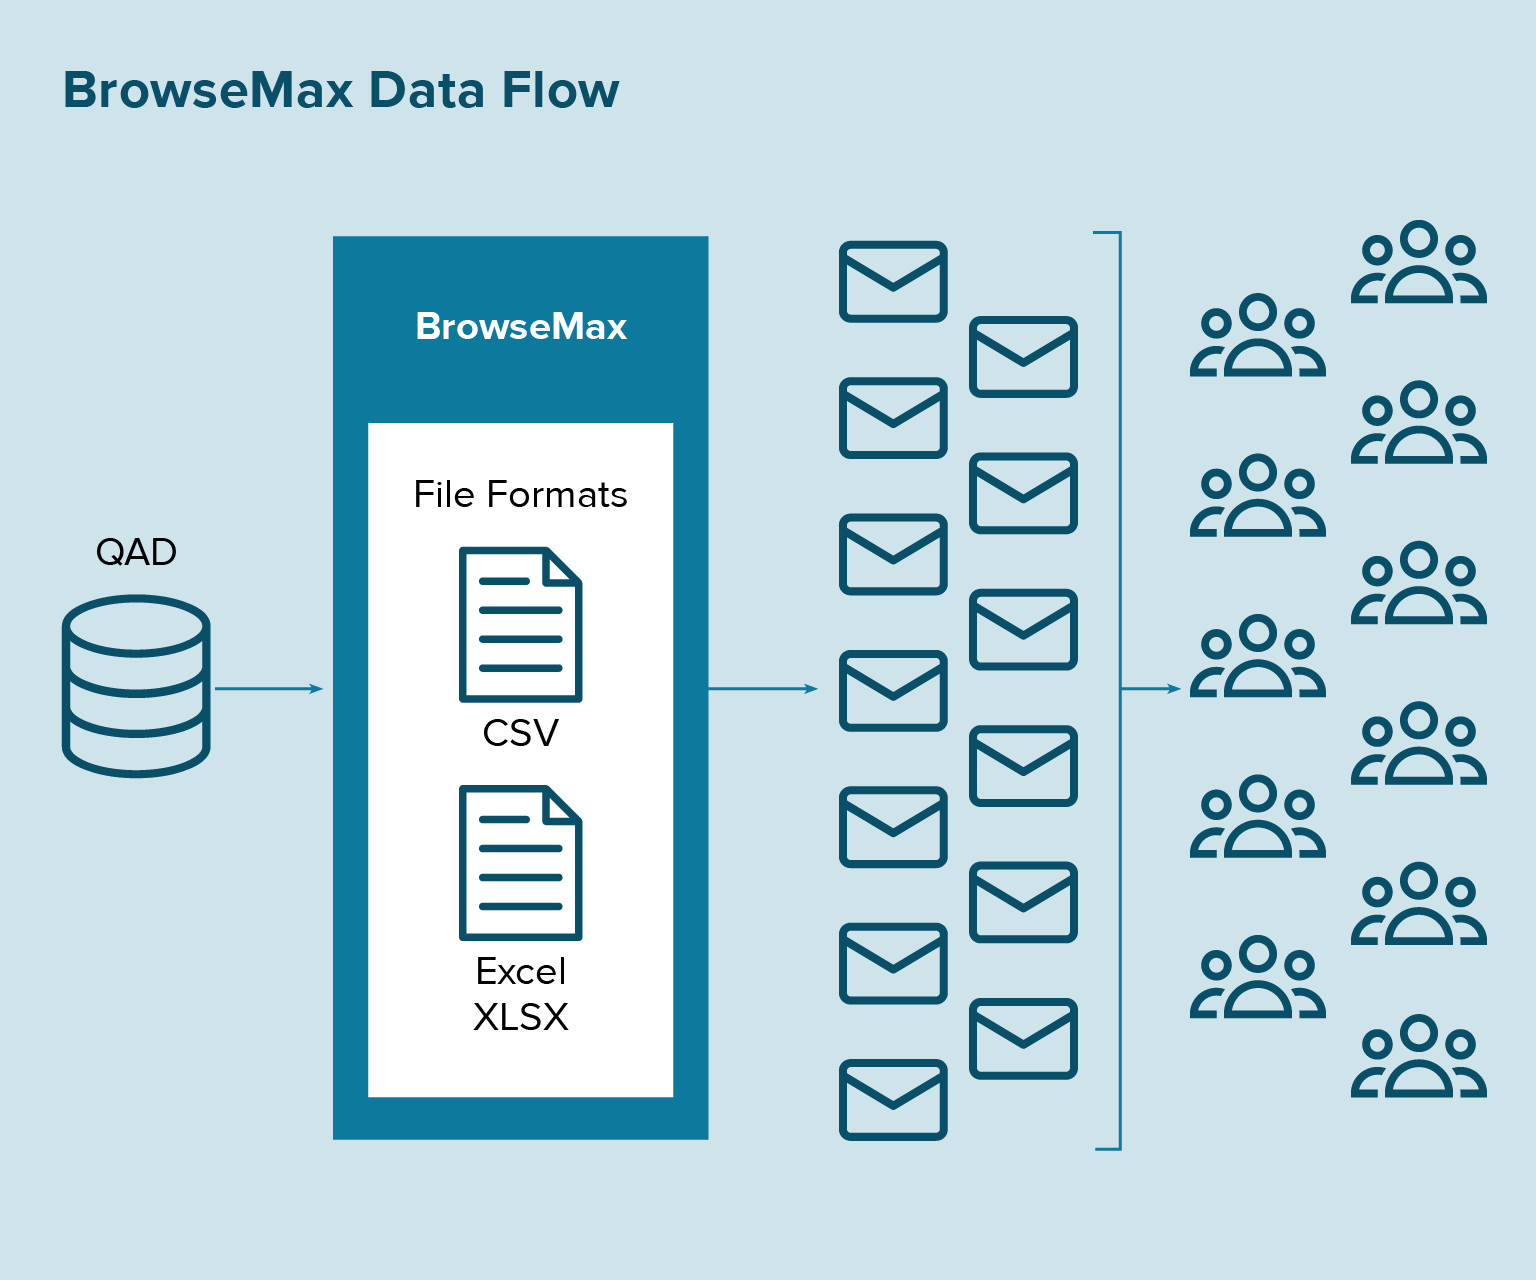 BrowseMax data flow mao.